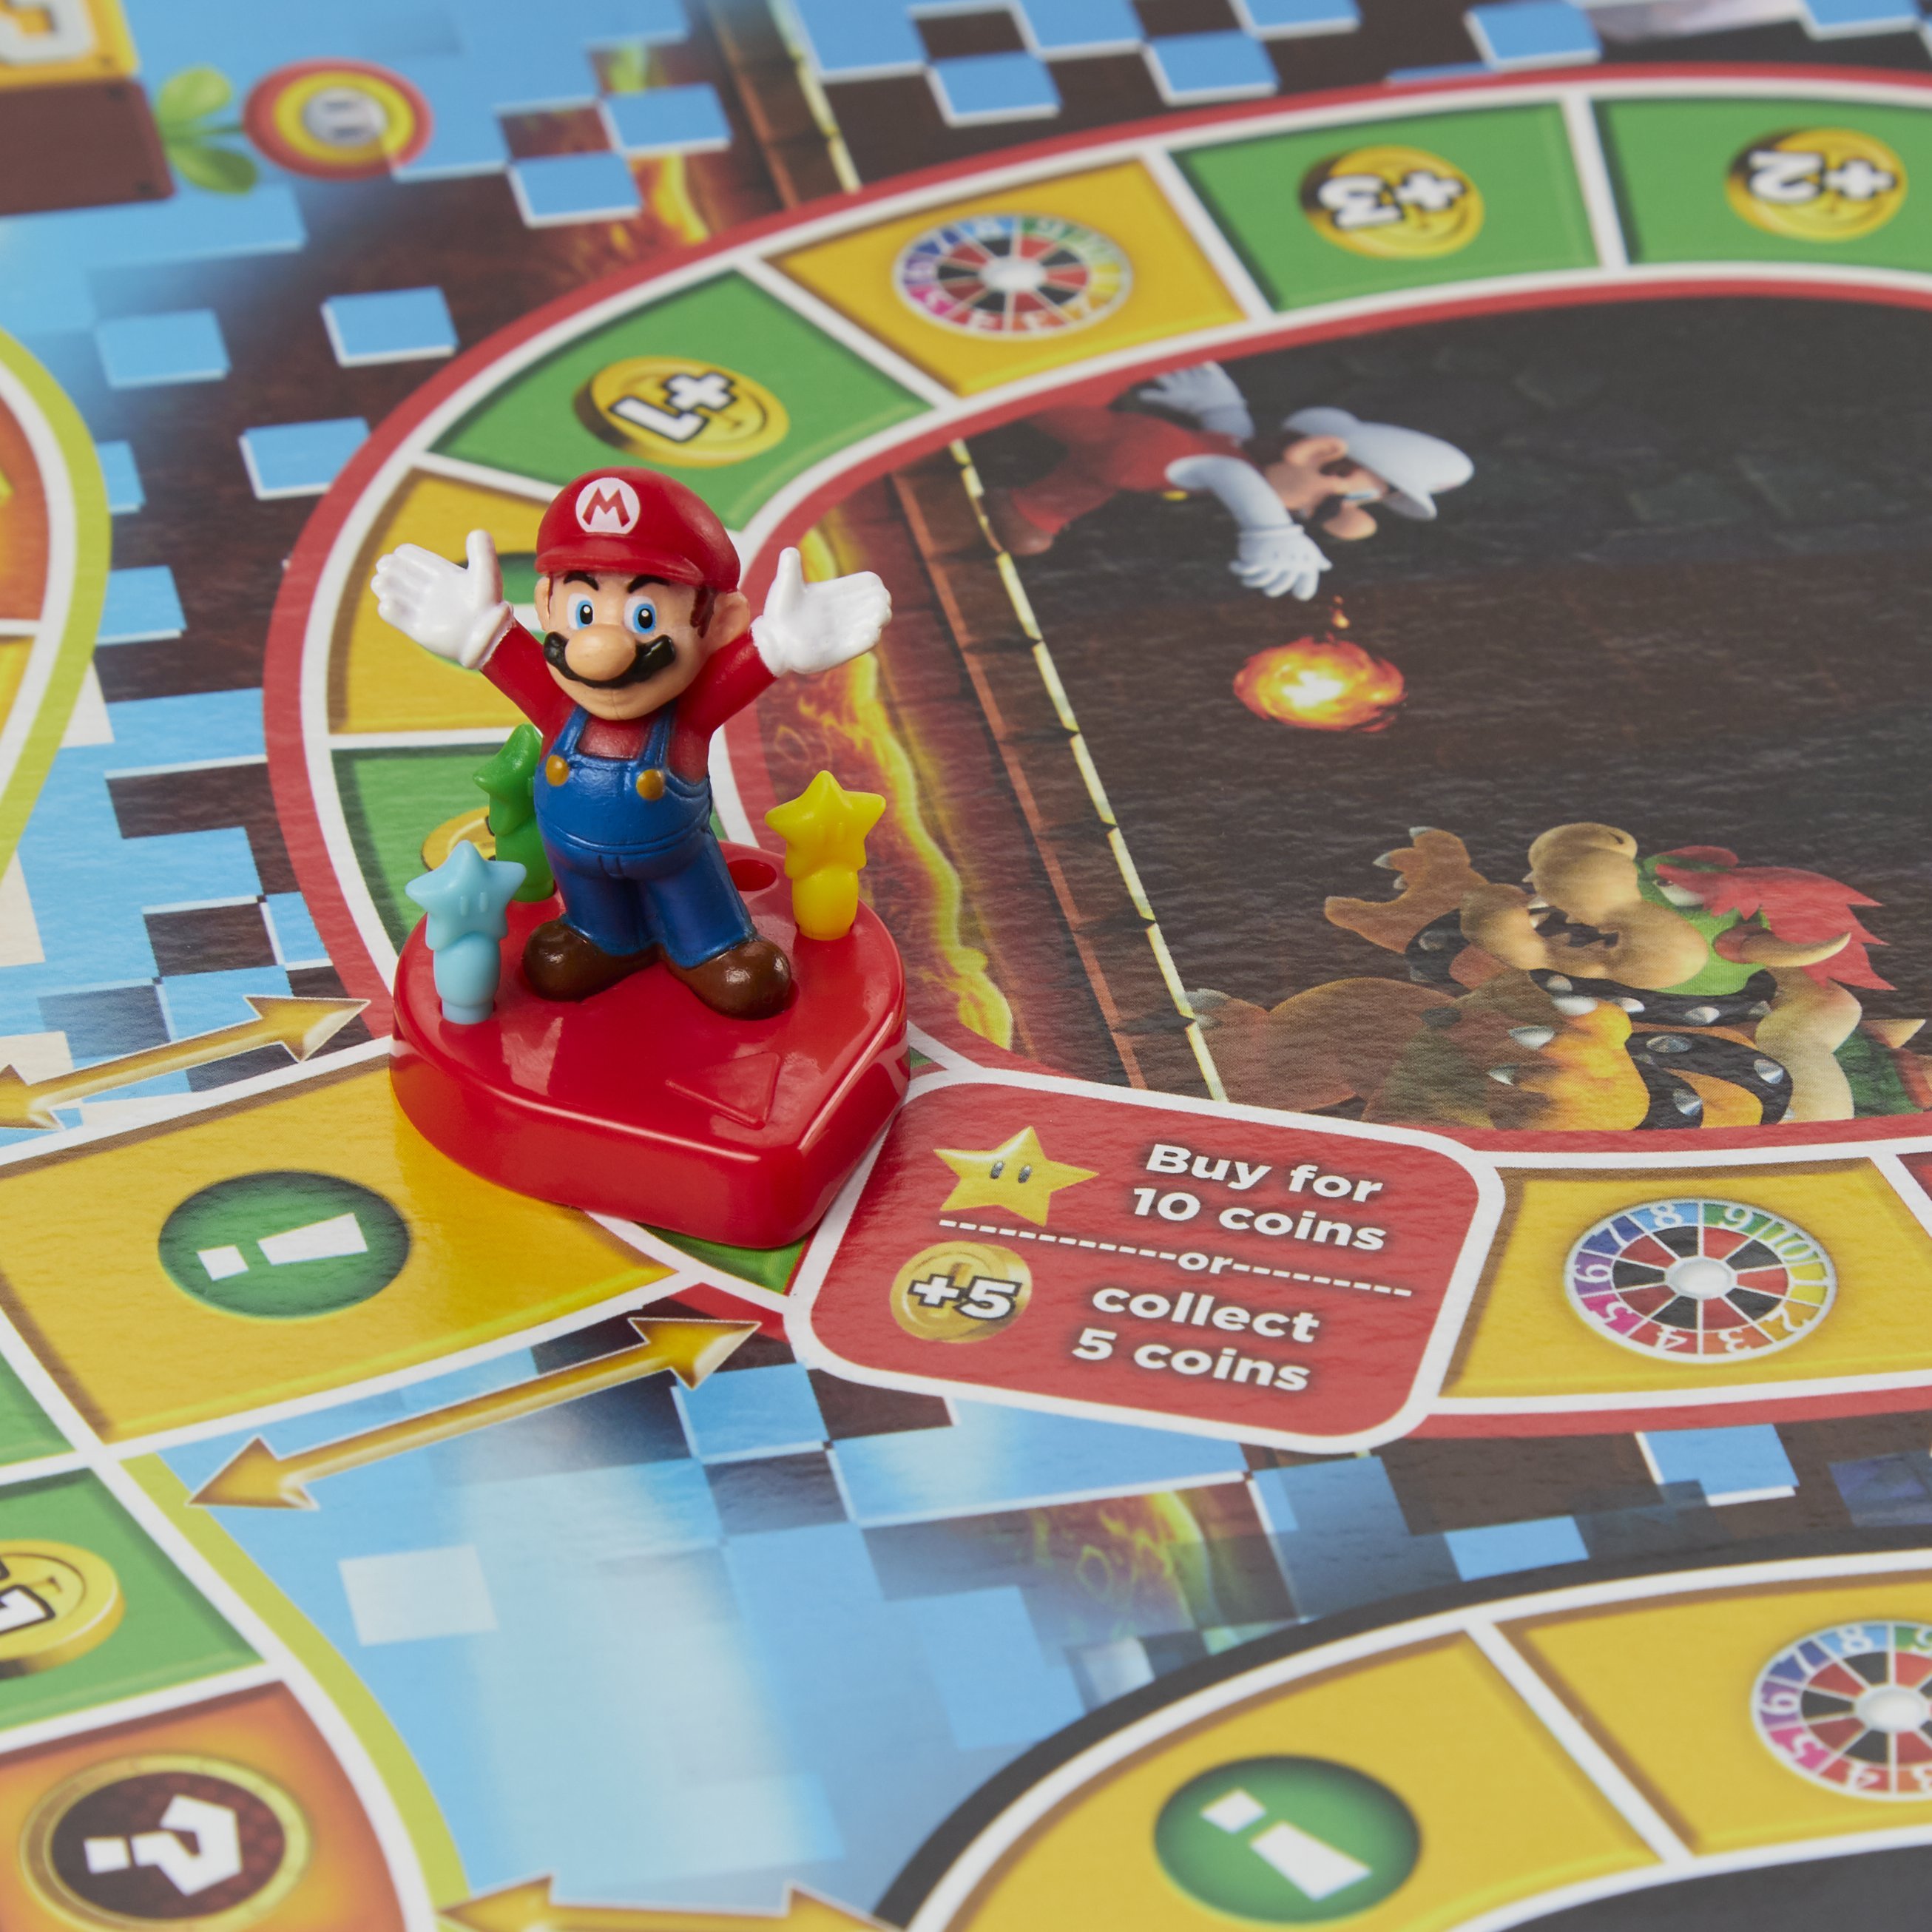 The Game Of Life: Super Mario Edition